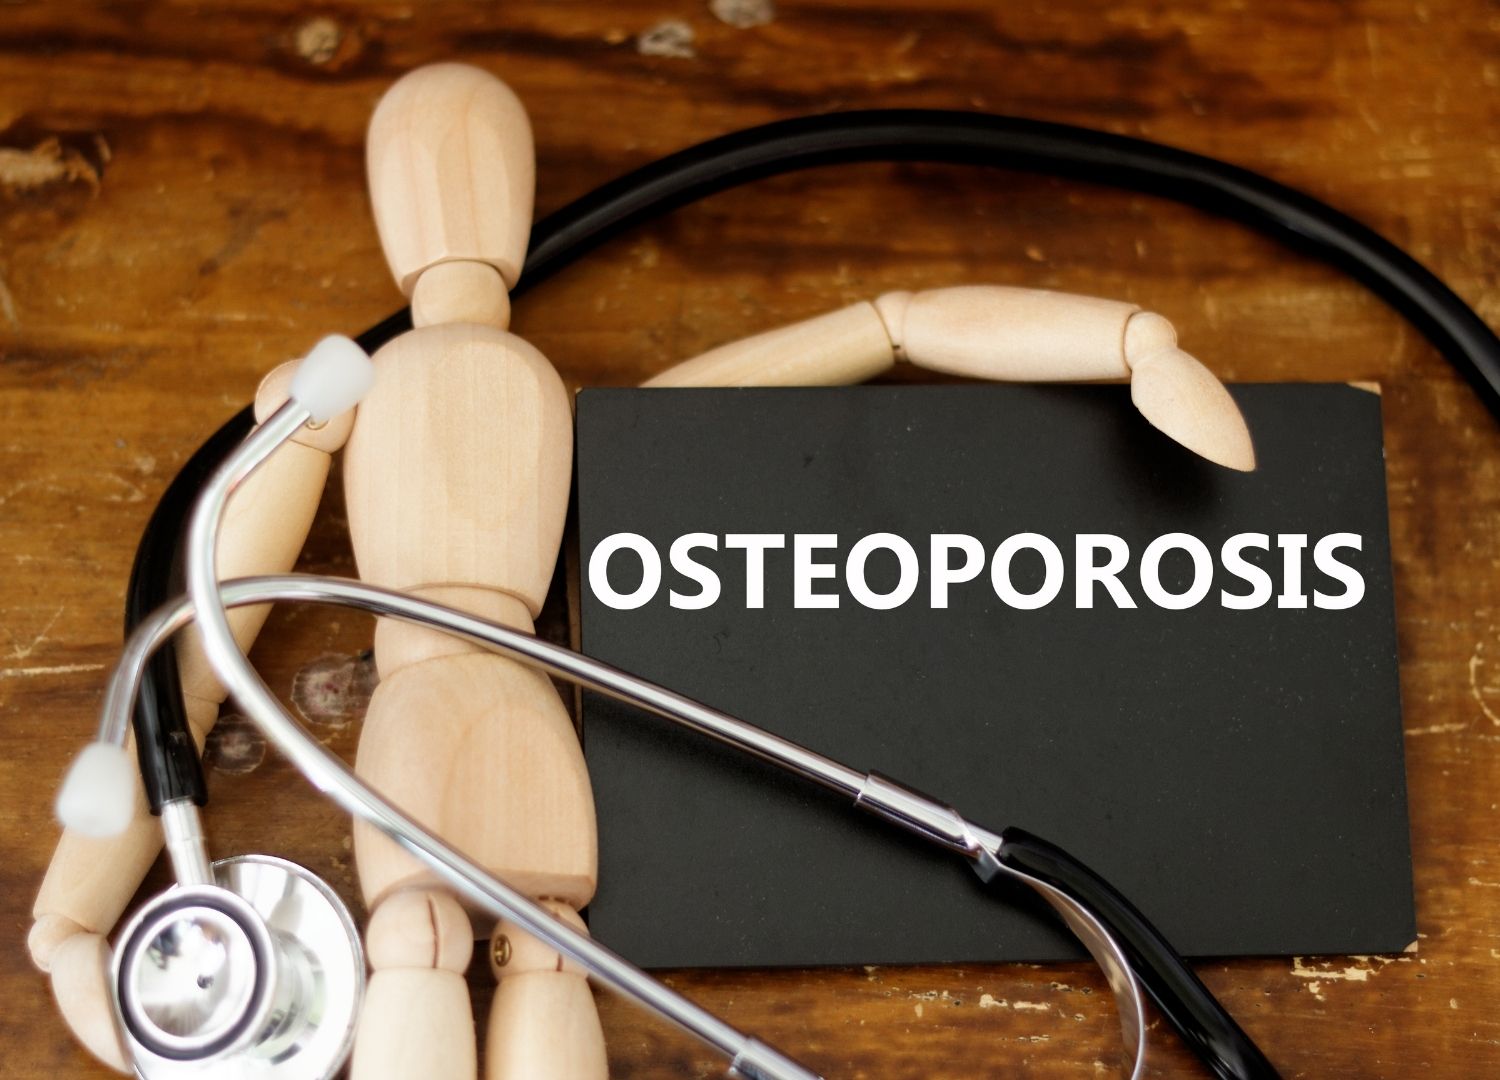 Osteoporosis: What does it mean?